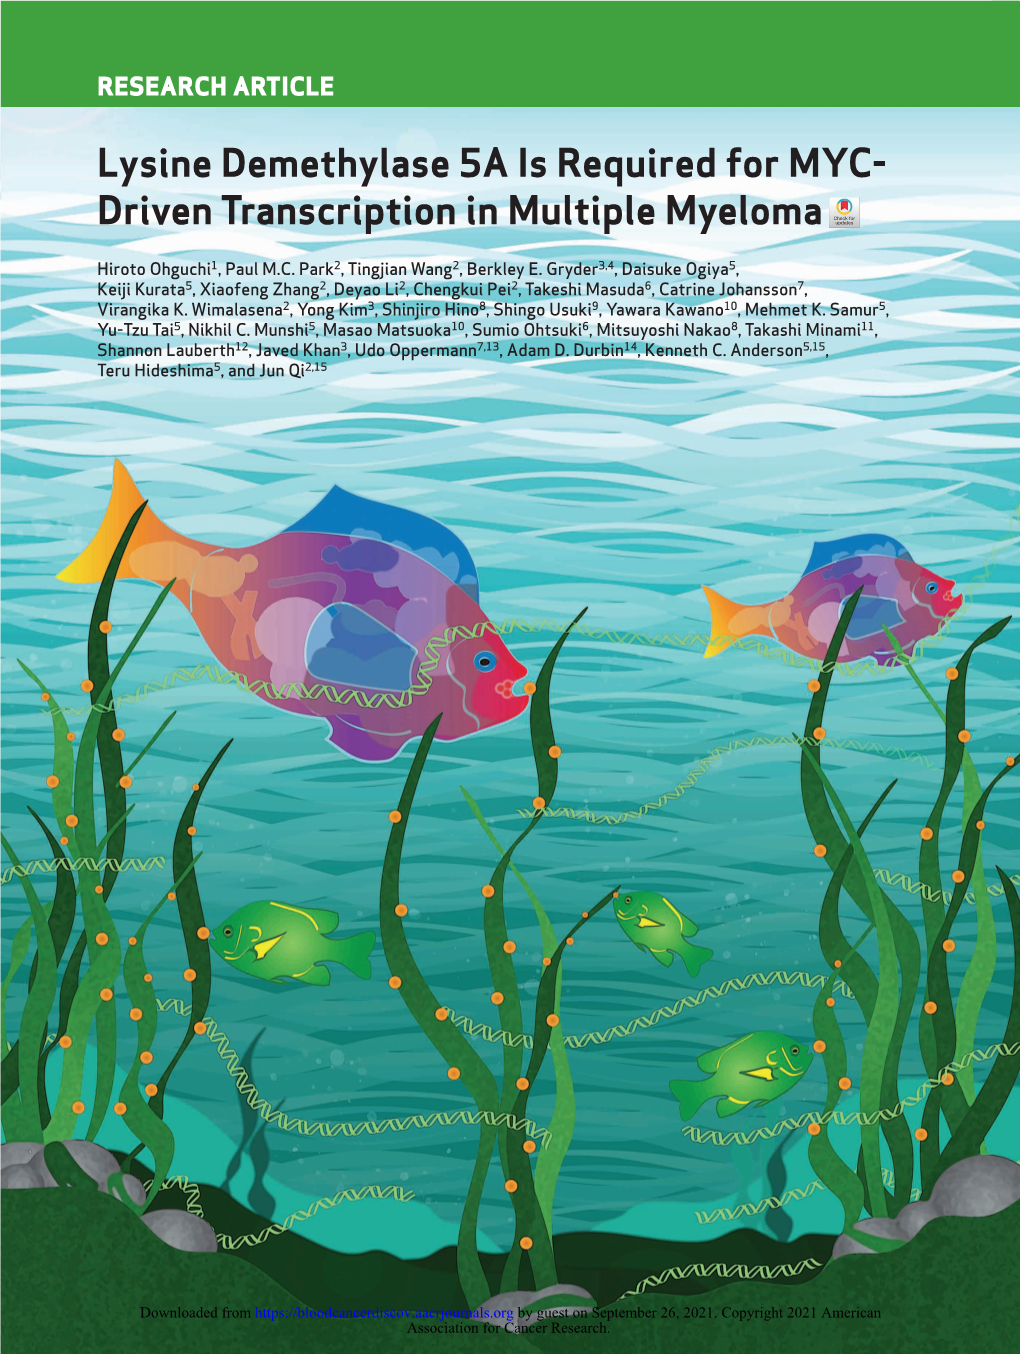 Driven Transcription in Multiple Myeloma